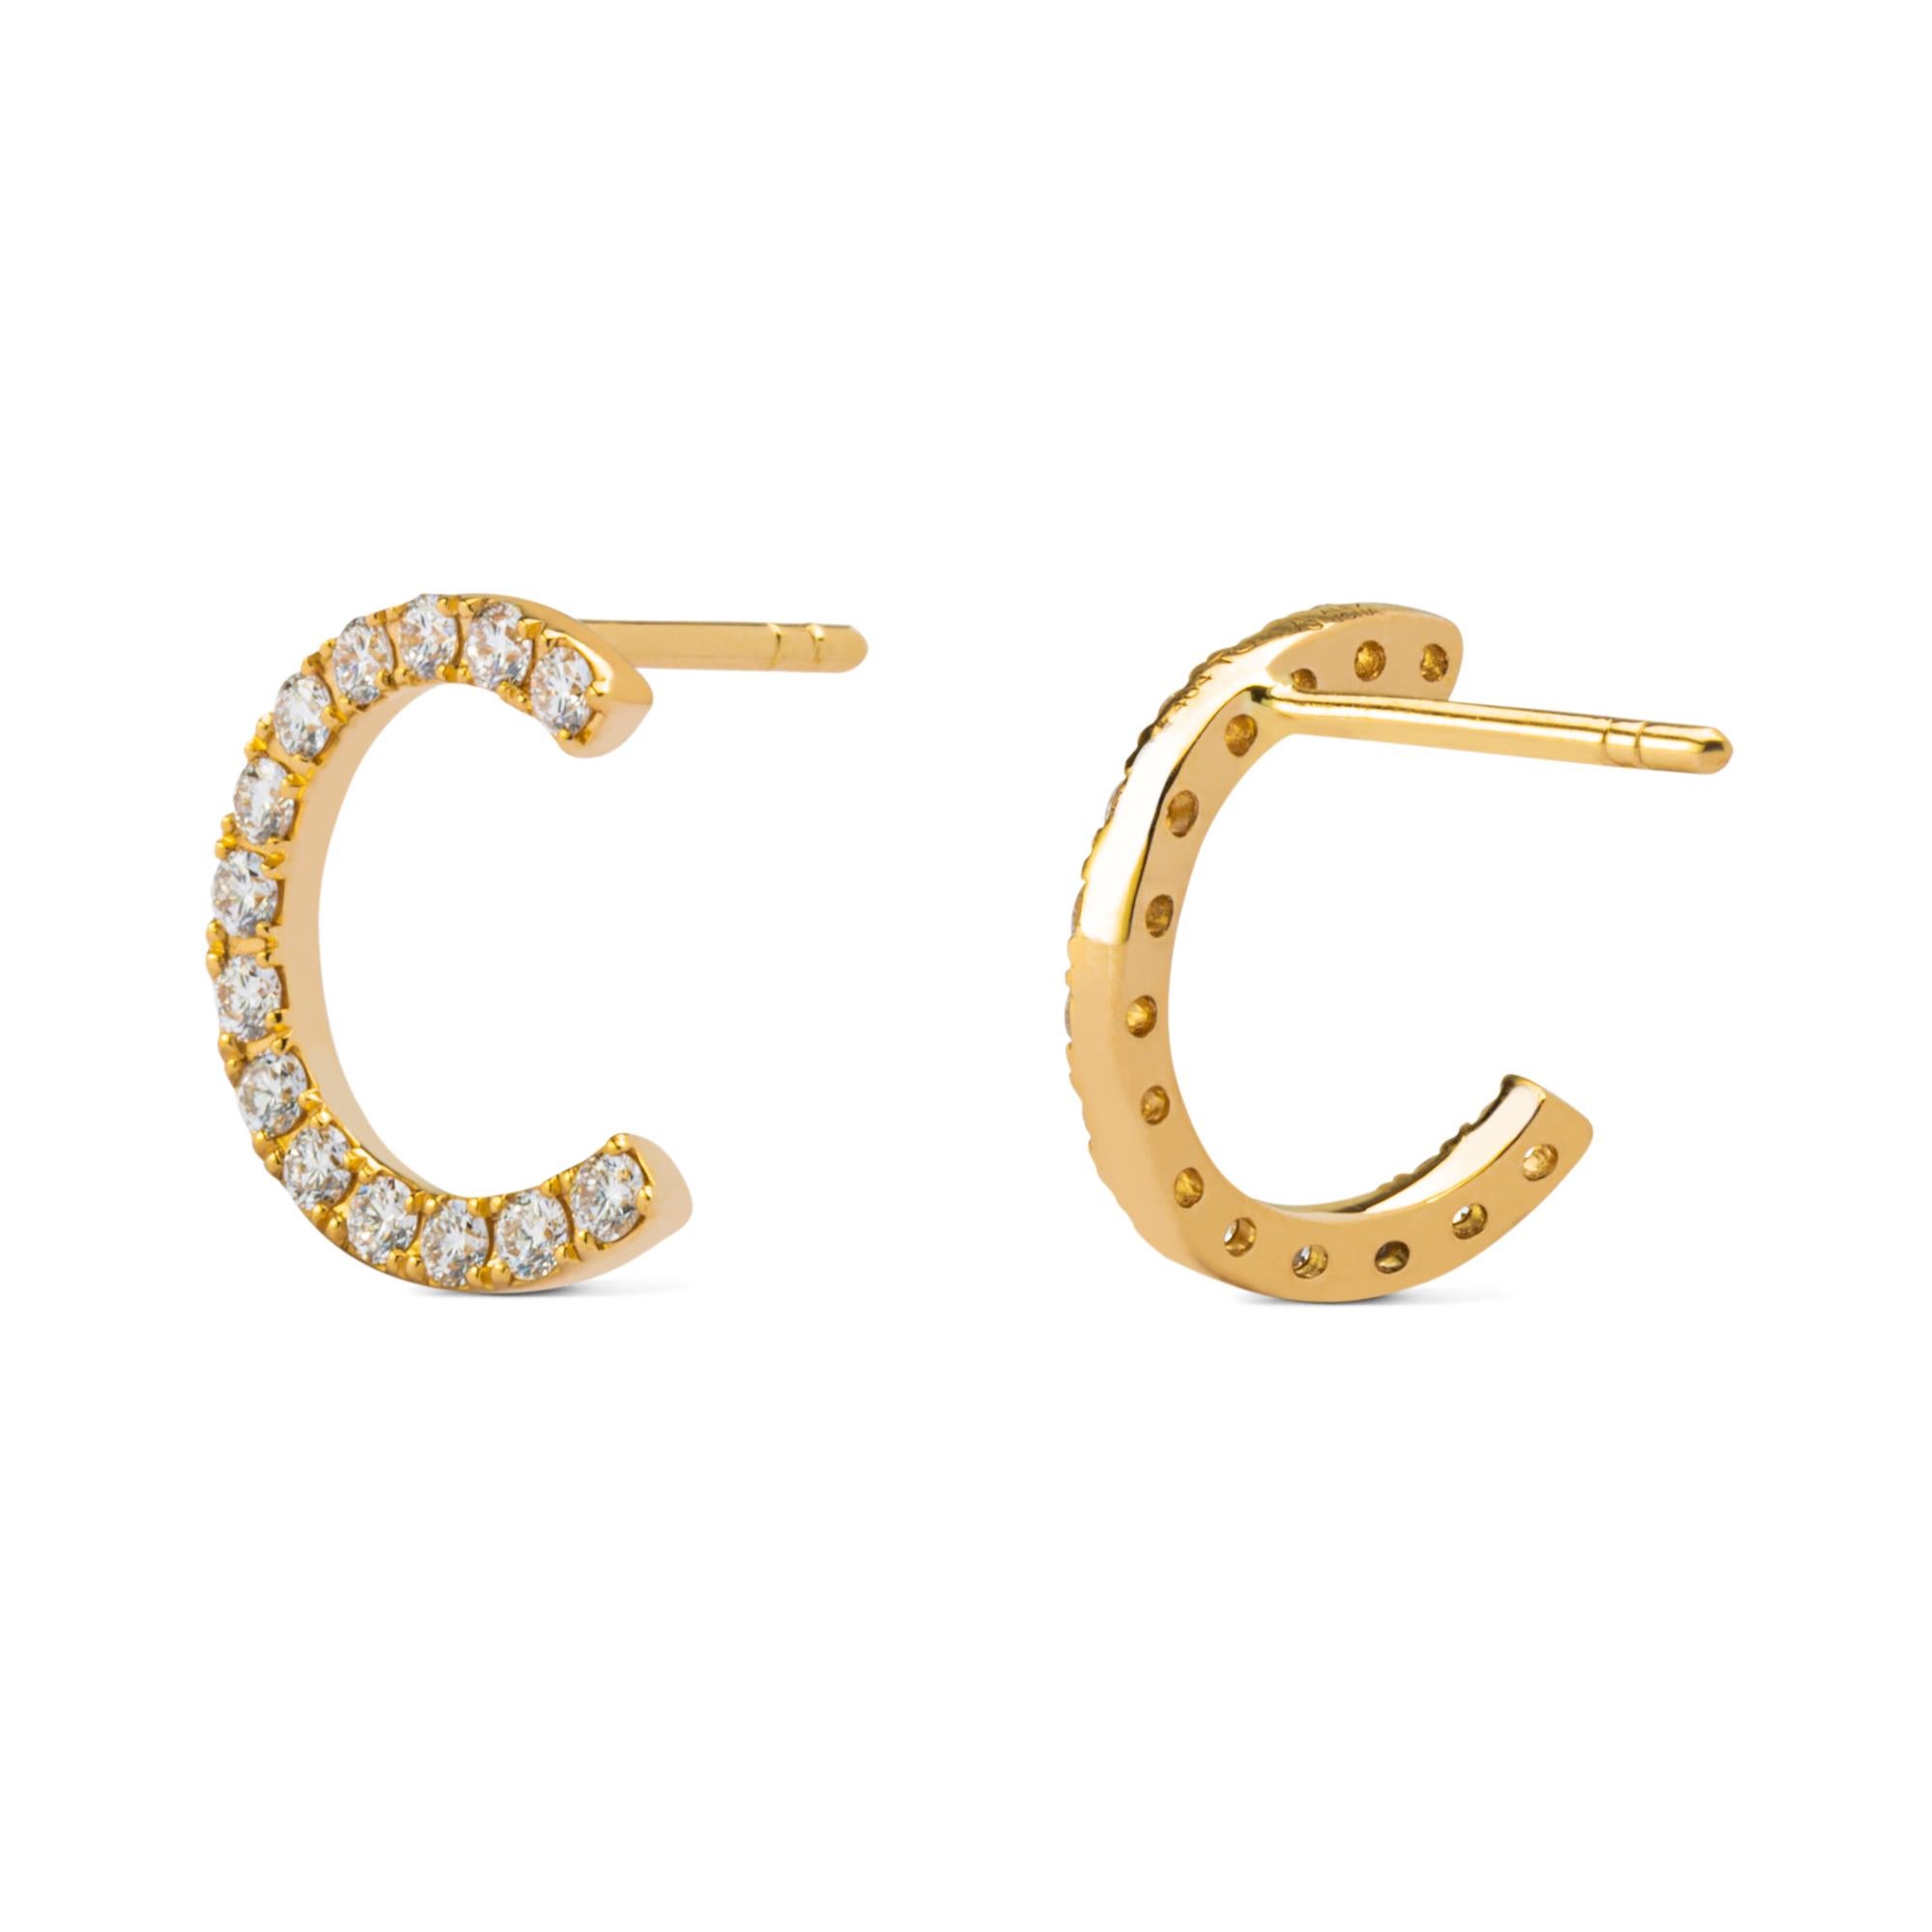 Alex Jona design collection, hand crafted in Italy, 18 karat Yellow gold diamond stud earrings set with 28 white diamonds, G color, VVS1-VVS2 clarity, for total 0.57 carats. 
Alex Jona jewels stand out, not only for their special design and for the